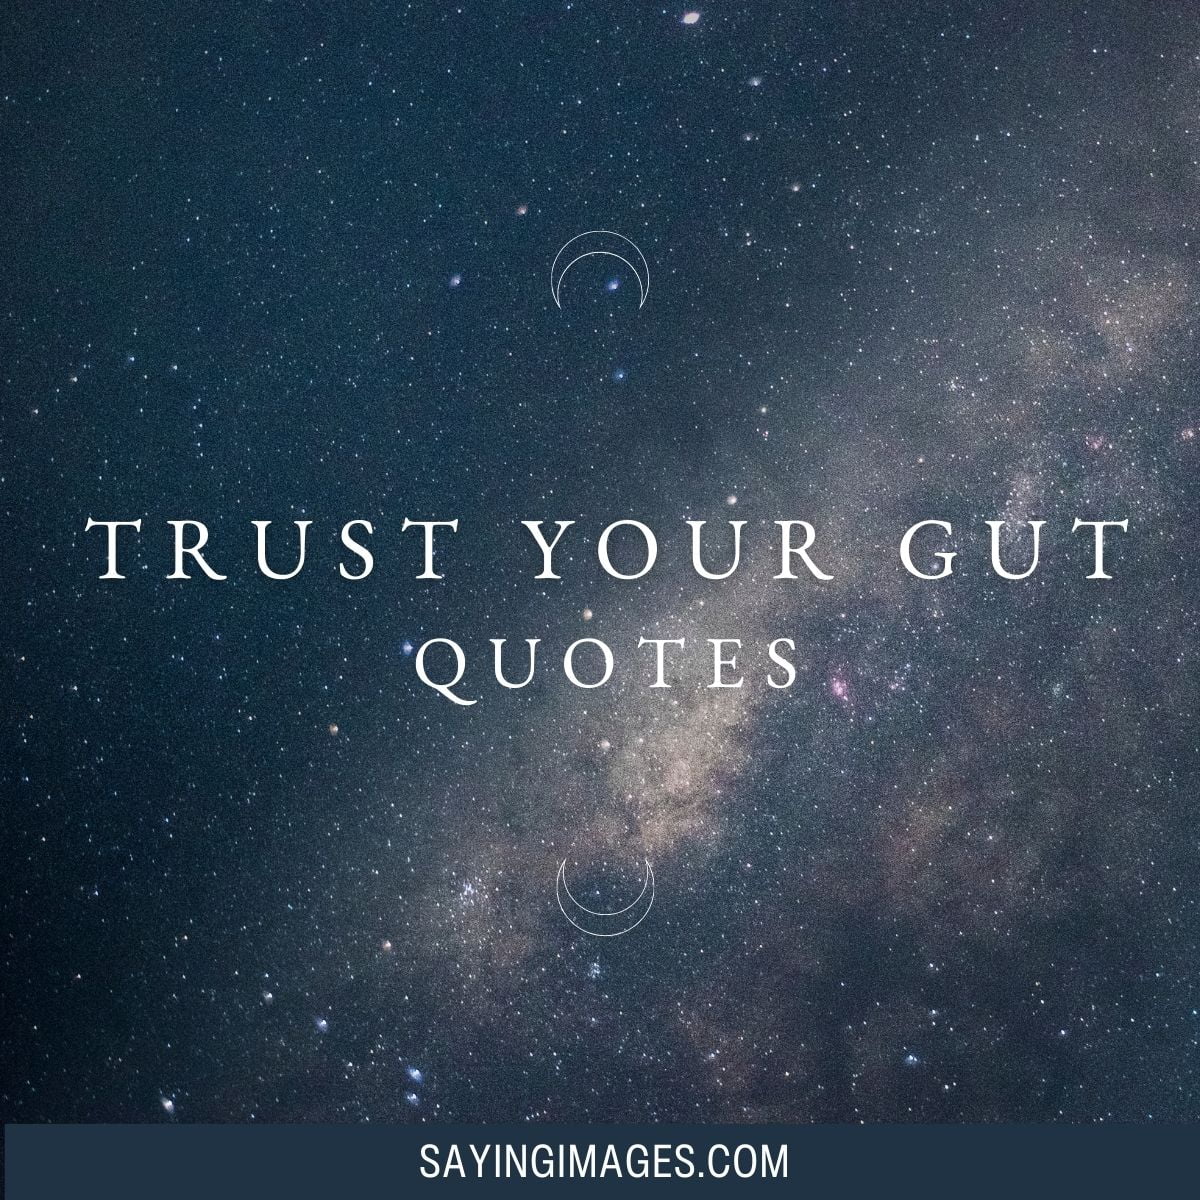 Quotes On Why You Should Trust Your Gut